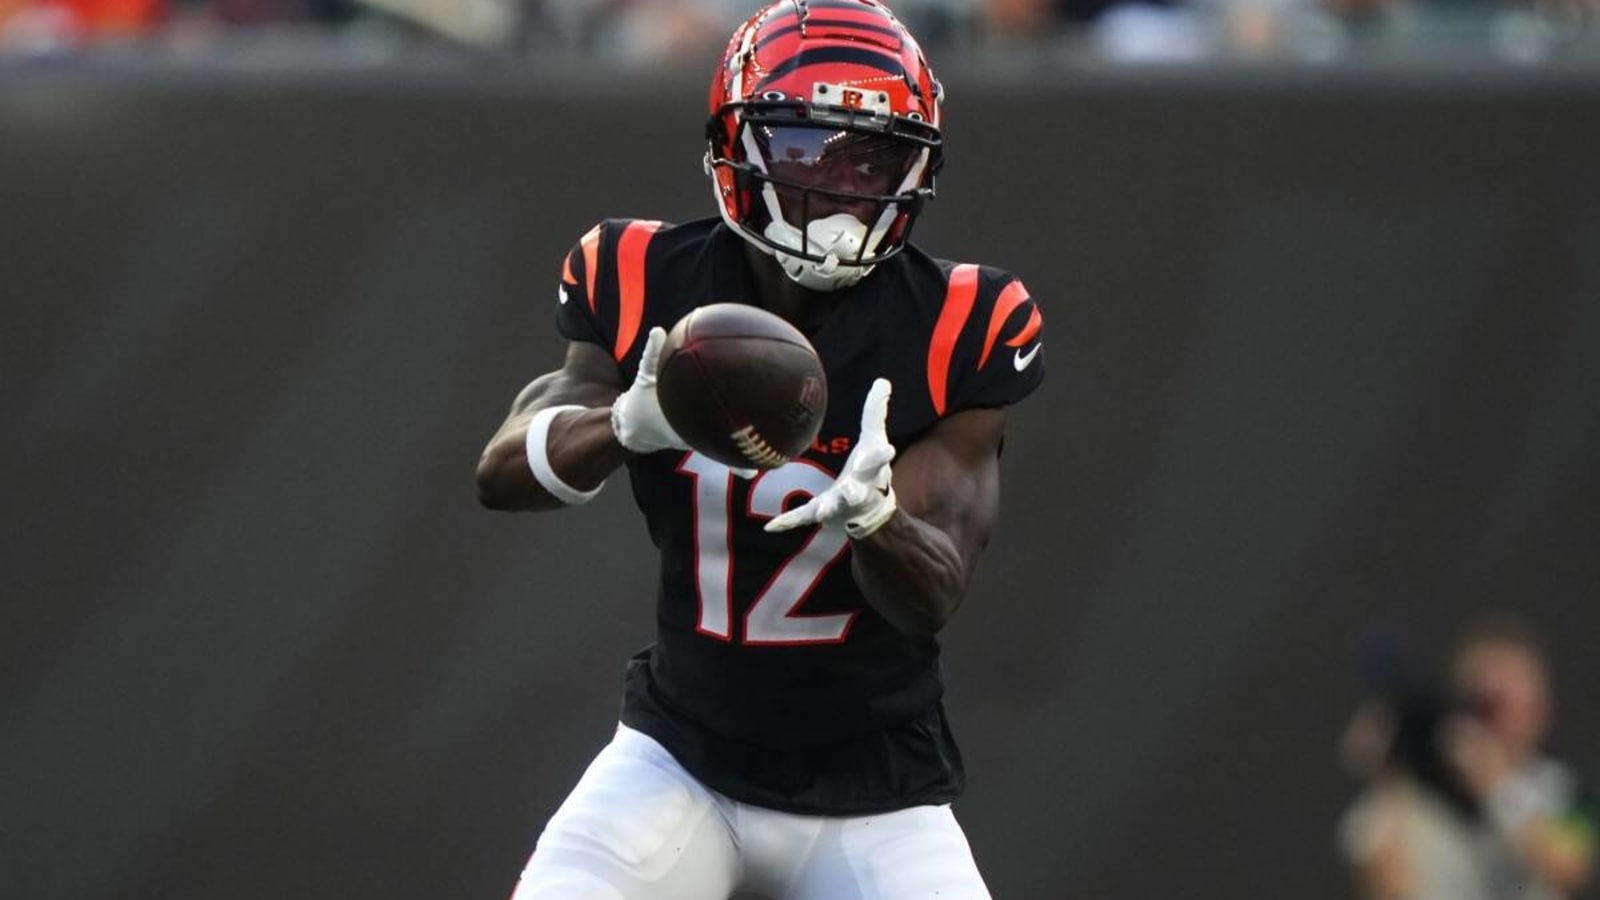 Bengals Elevate Two Wide Receivers From Practice Squad for Matchup With Texans